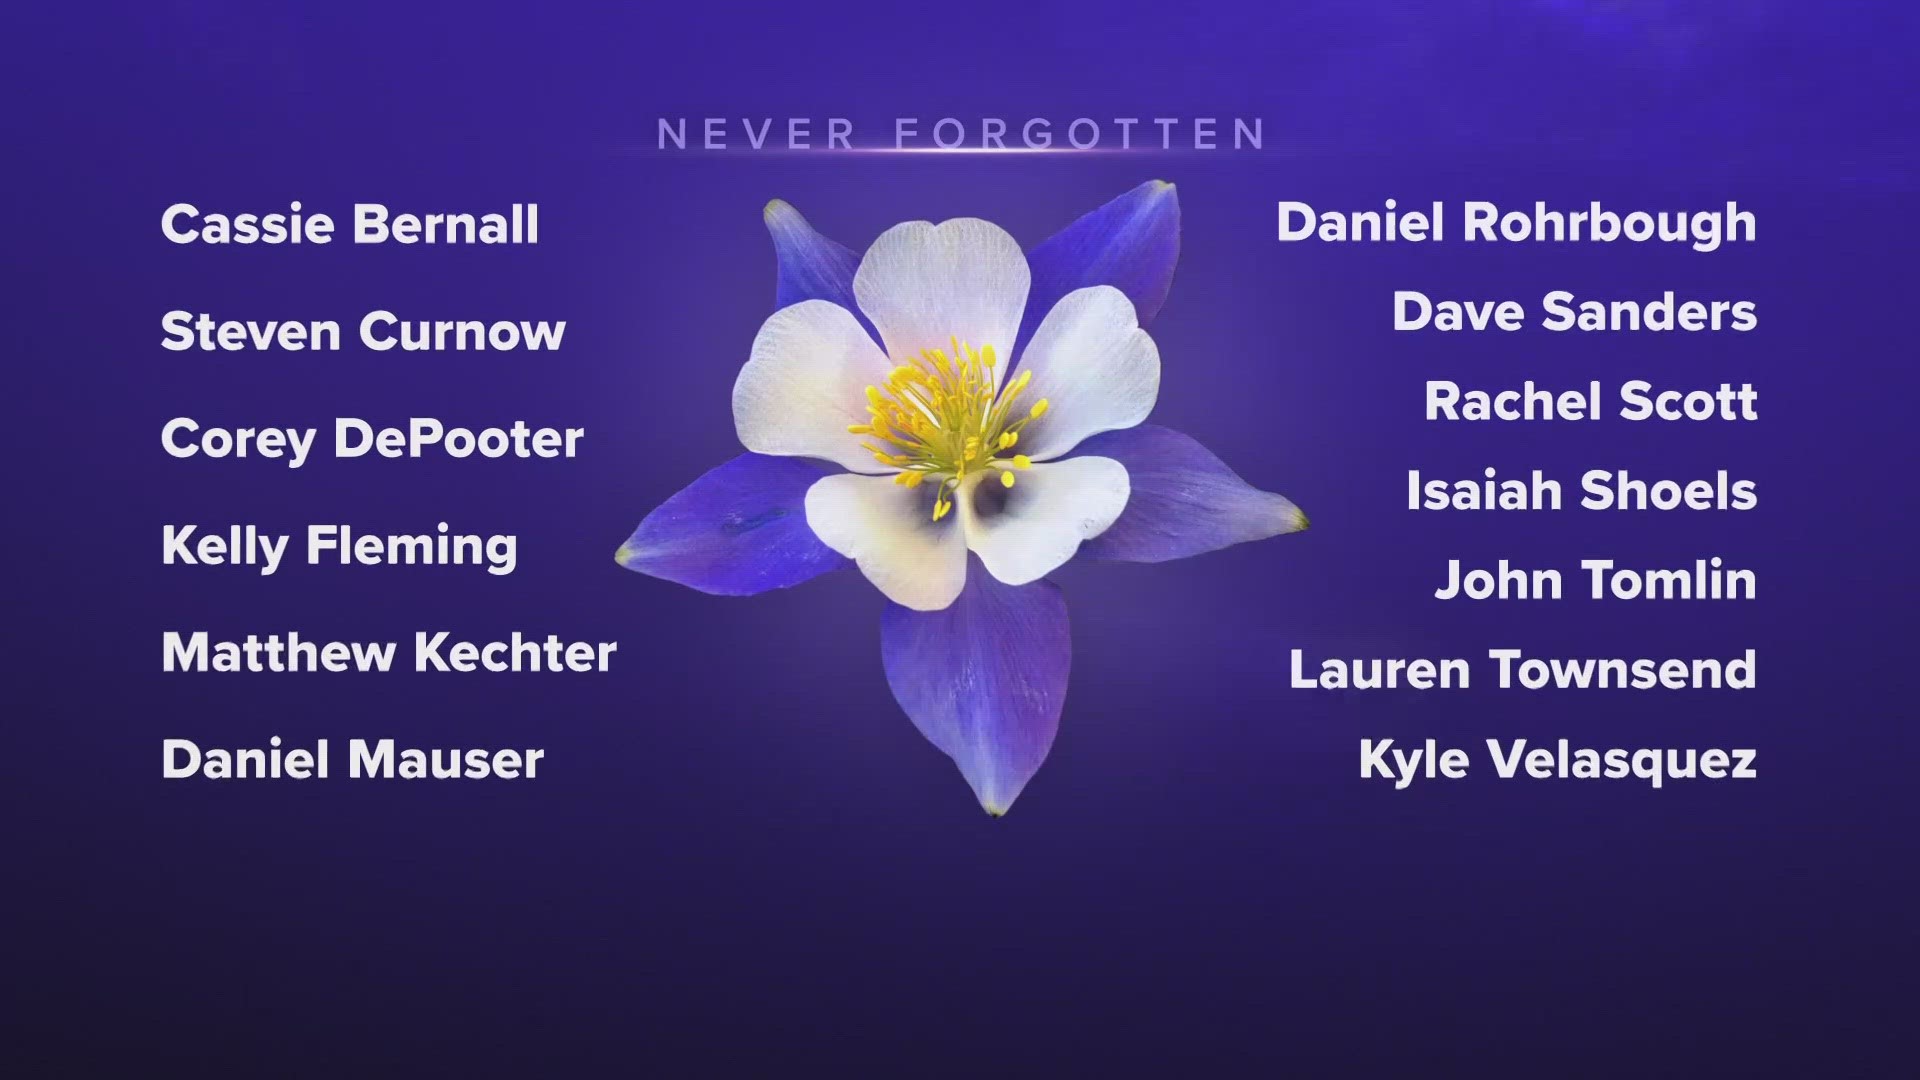 Every year, we remember the 12 students and one teacher who died in the shooting at Columbine High School in 1999.